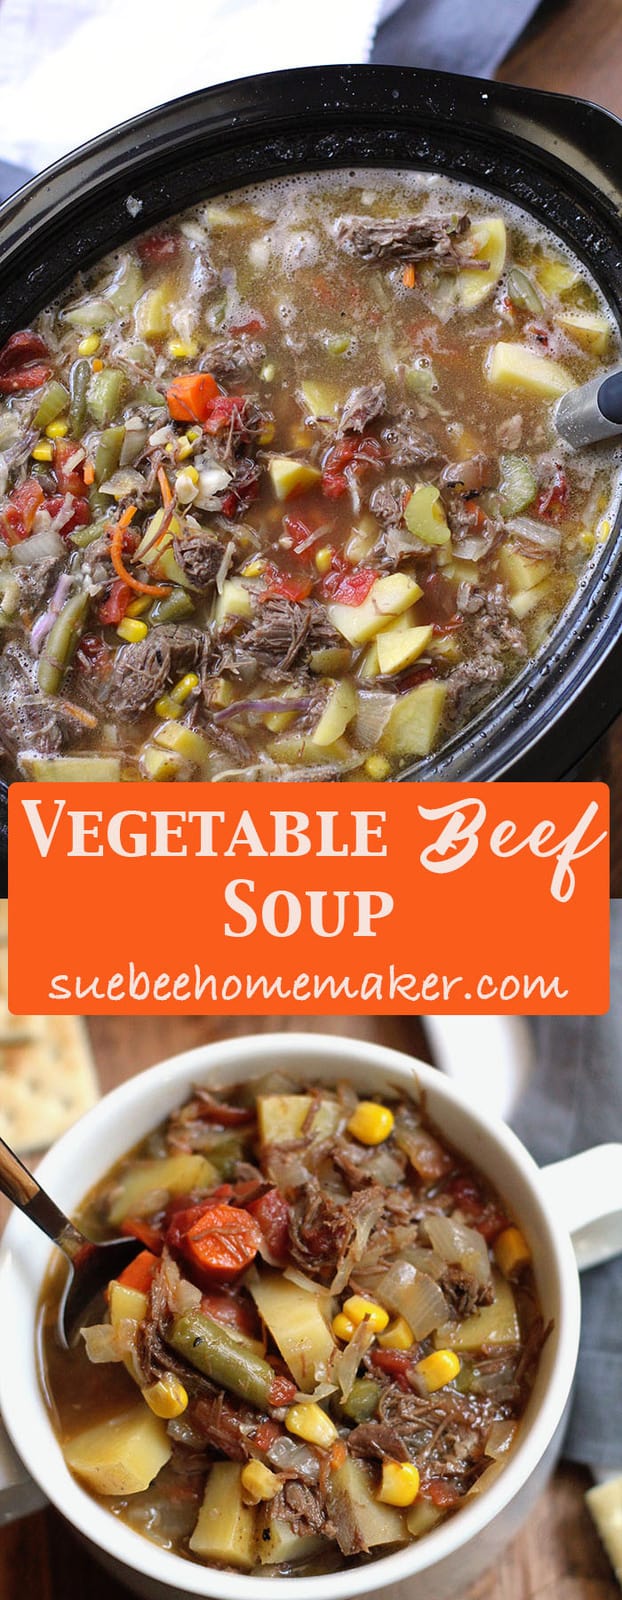 Slow cooker filled with vegetable beef soup.